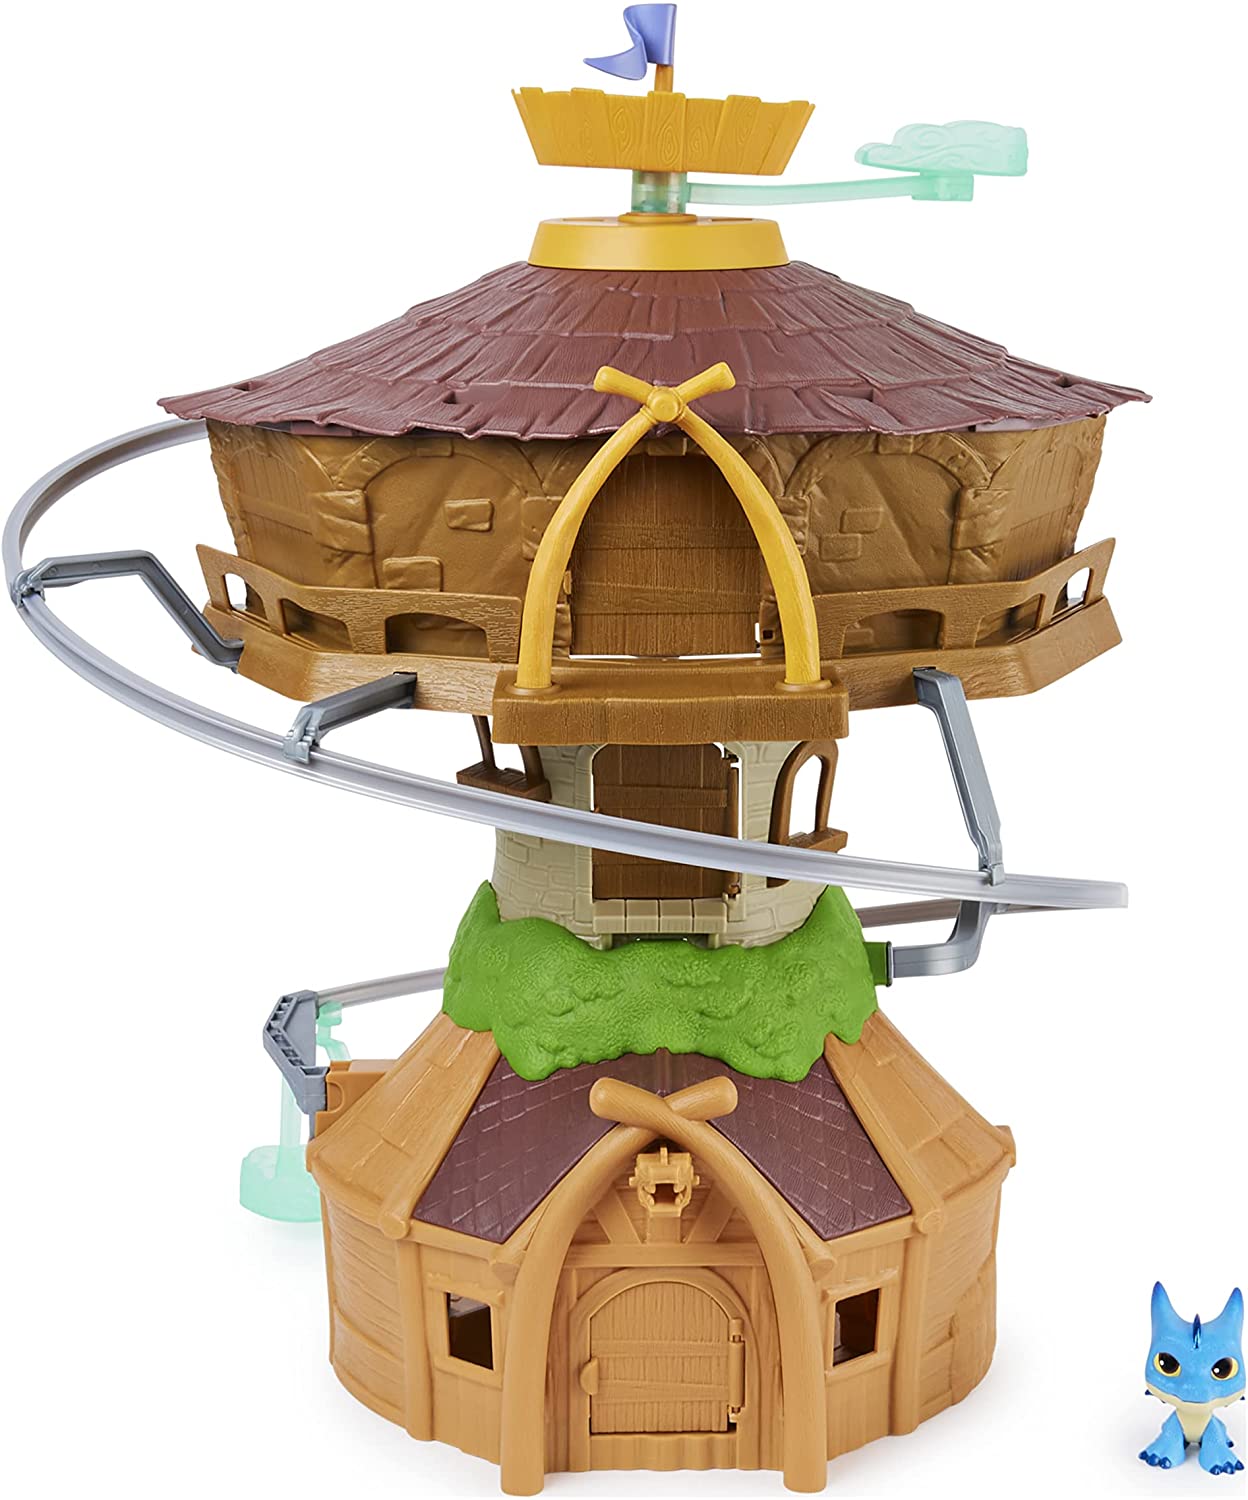 DreamWorks Dragons Rescue Riders Roost Adventure Playset w/ Mini Winger Dragon Figure $14.99 ~ Amazon or Target